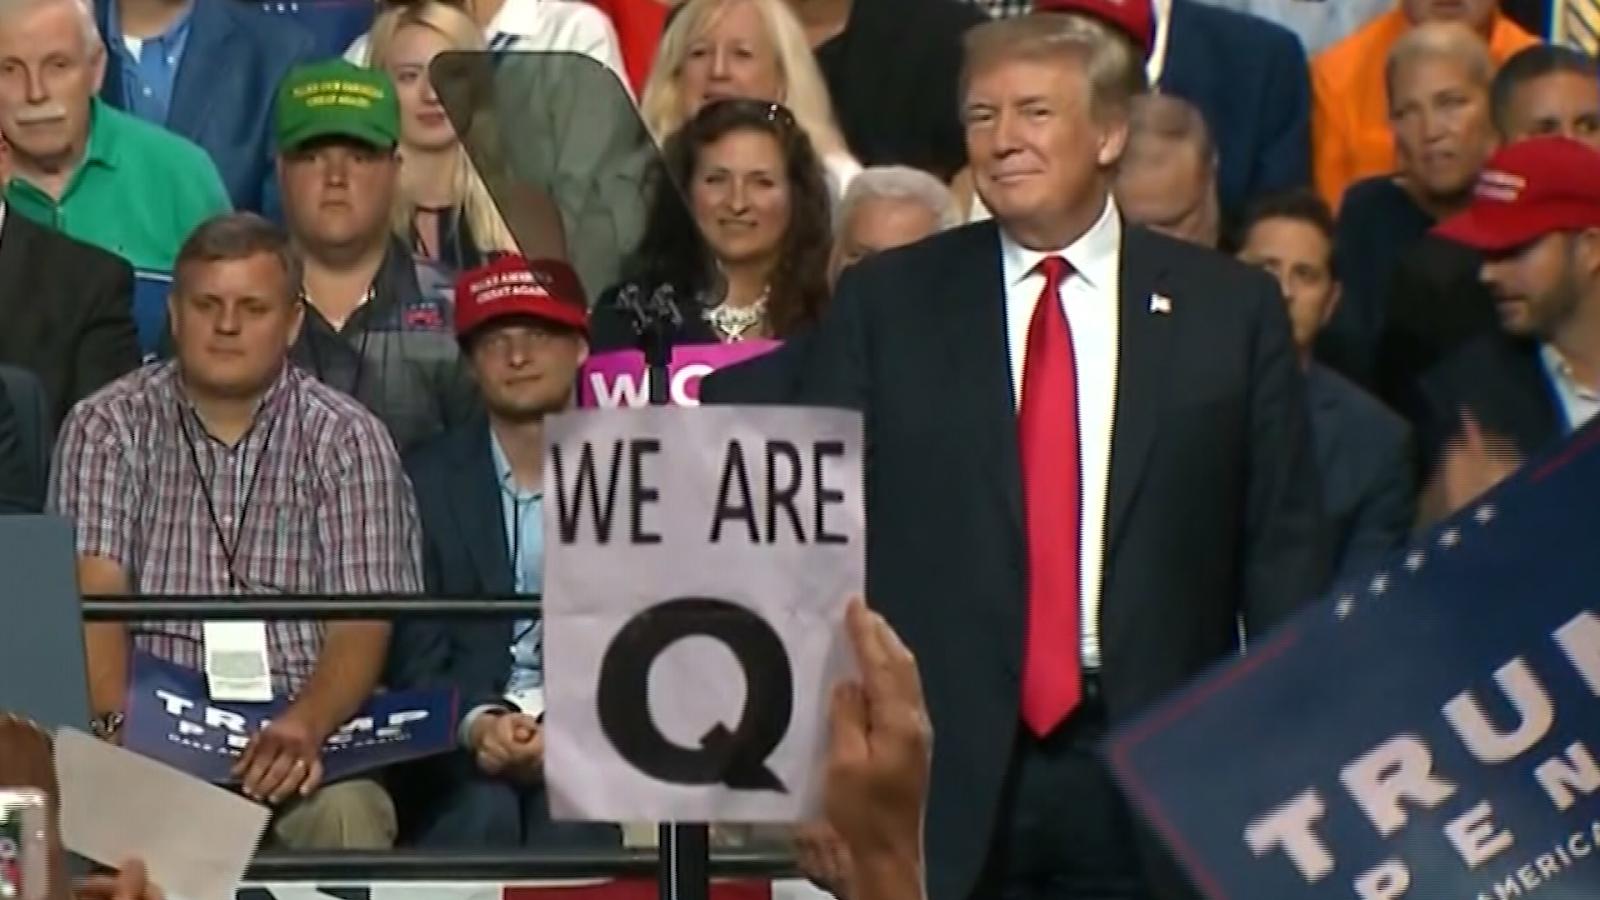 Jim Denison on Why QAnon is Dangerous and How Christians Can Respond